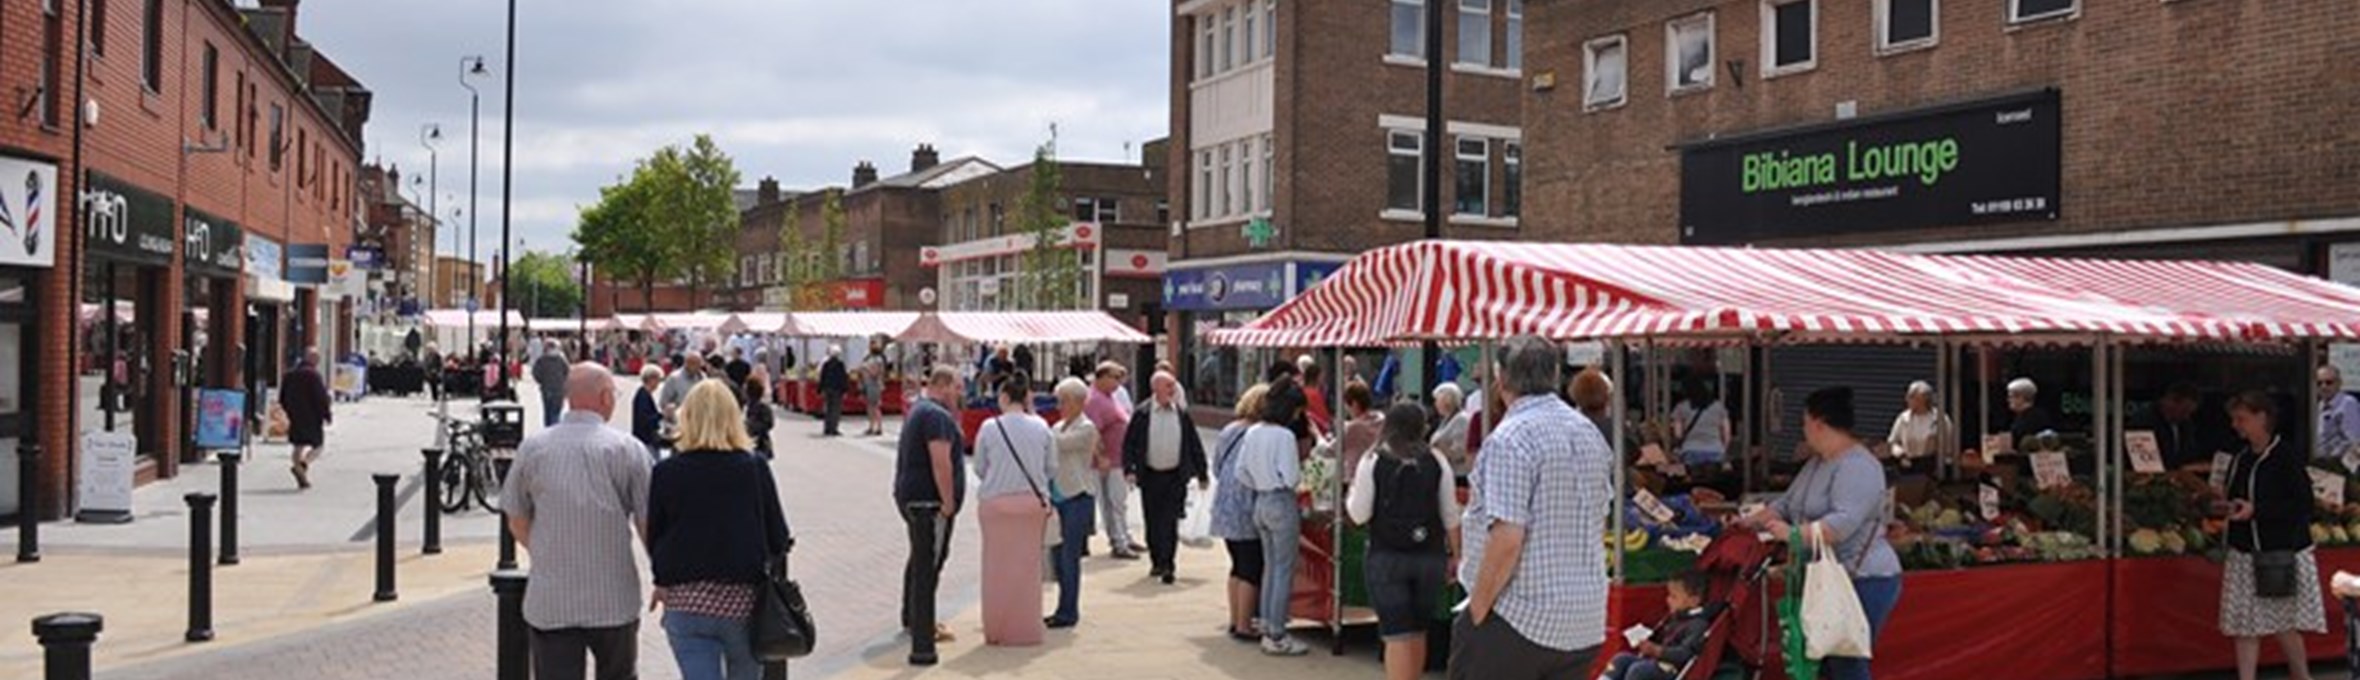 Hucknall outdoor market with stalls along pedestrianised road and people shopping